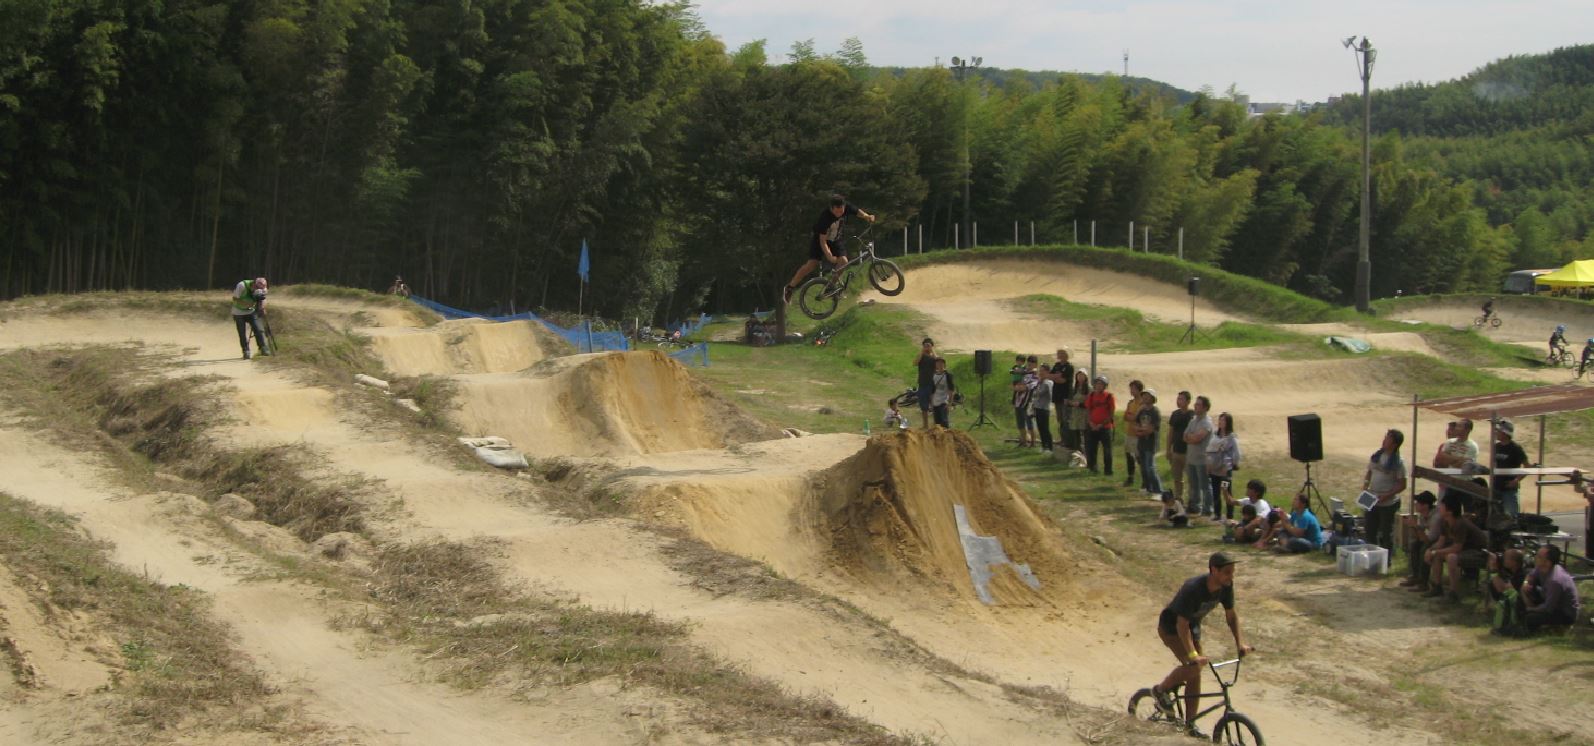 Right side view of a cyclist, high in the air, after jumping a bike off a ramp on a dirt BMX track with people watching